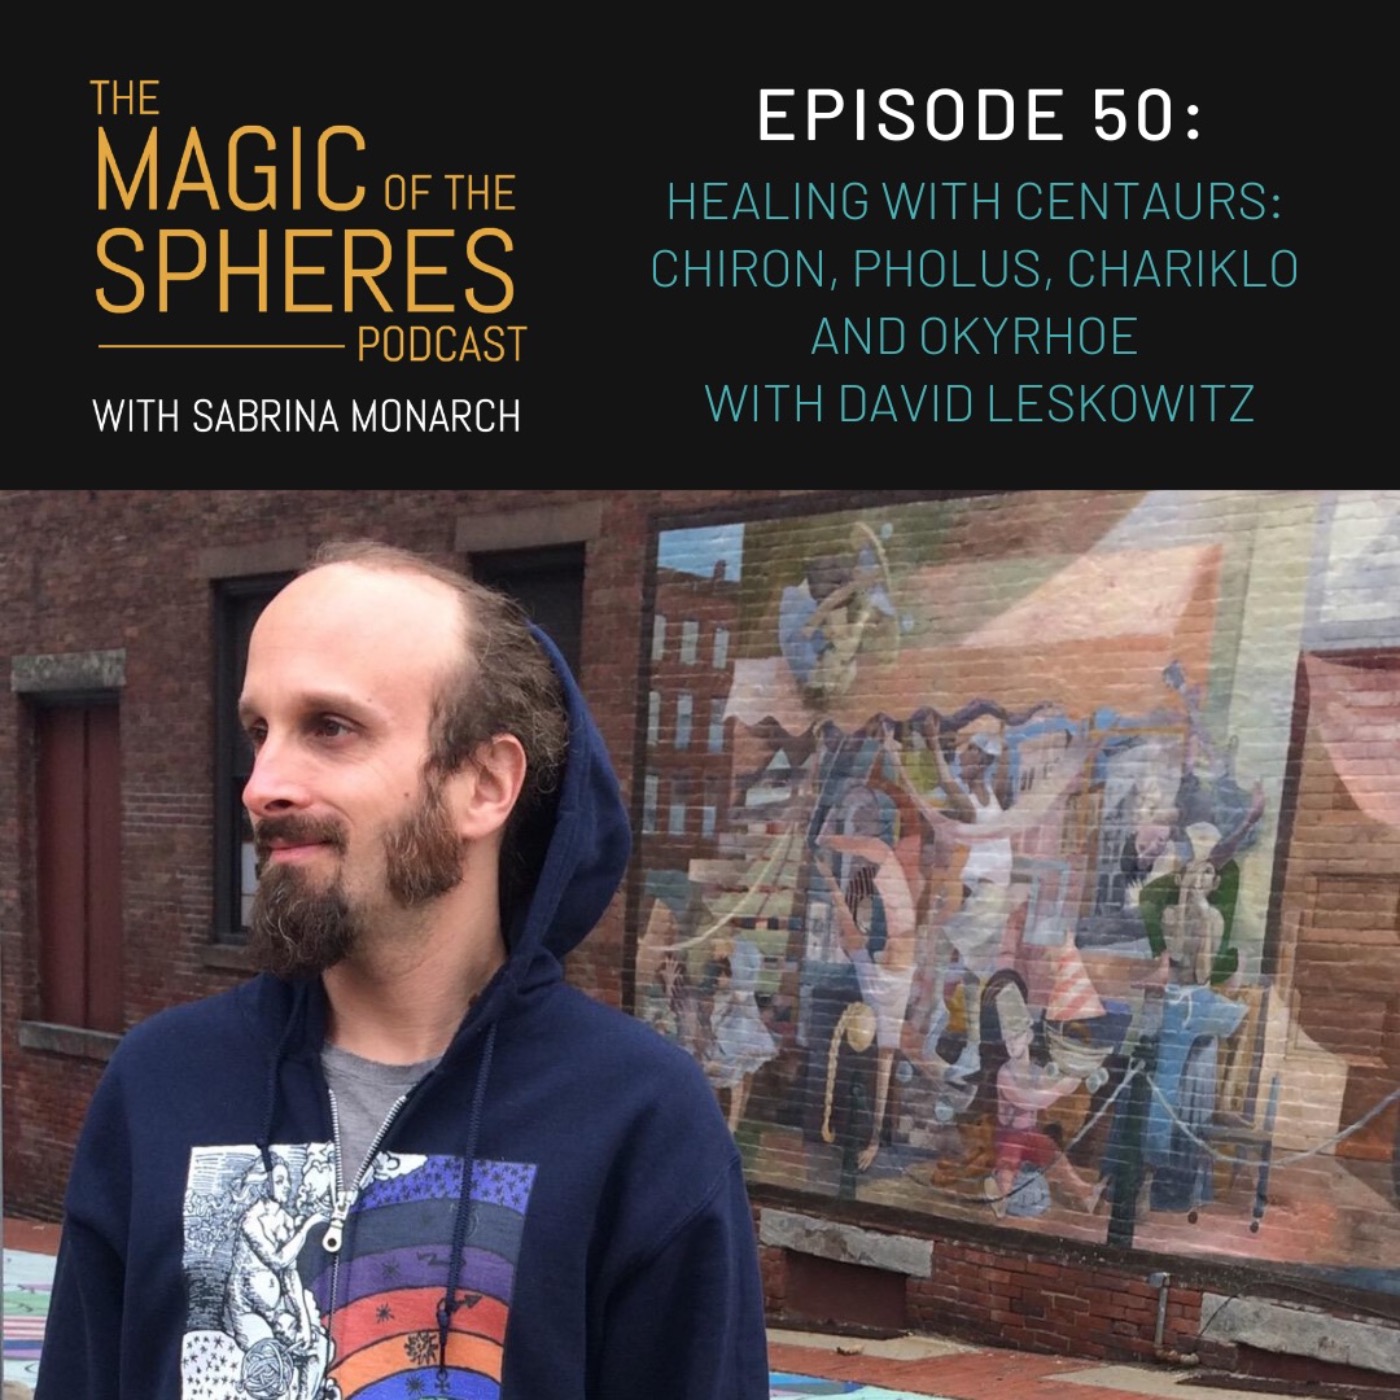 Healing with Centaurs: Chiron, Pholus, Chariklo and Okyrhoe with David Leskowitz